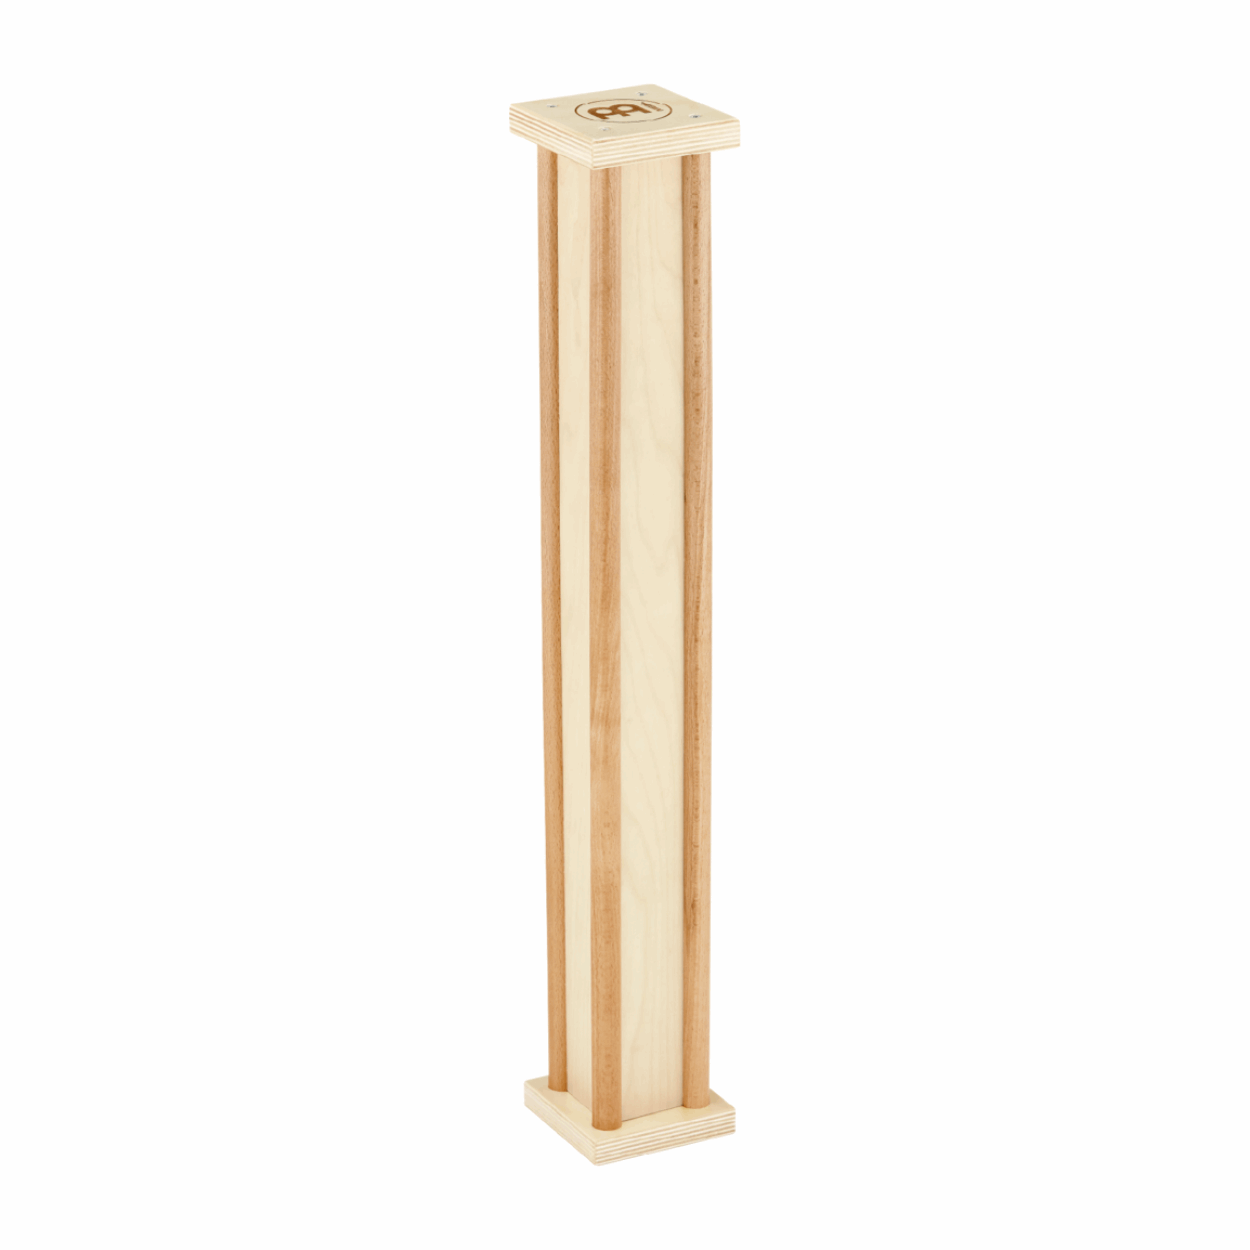 DISPLAY CLEARANCE - MEINL PERCUSSION PRORM1NT PRO RAINMAKER, NATURAL | MEINL , Zoso Music